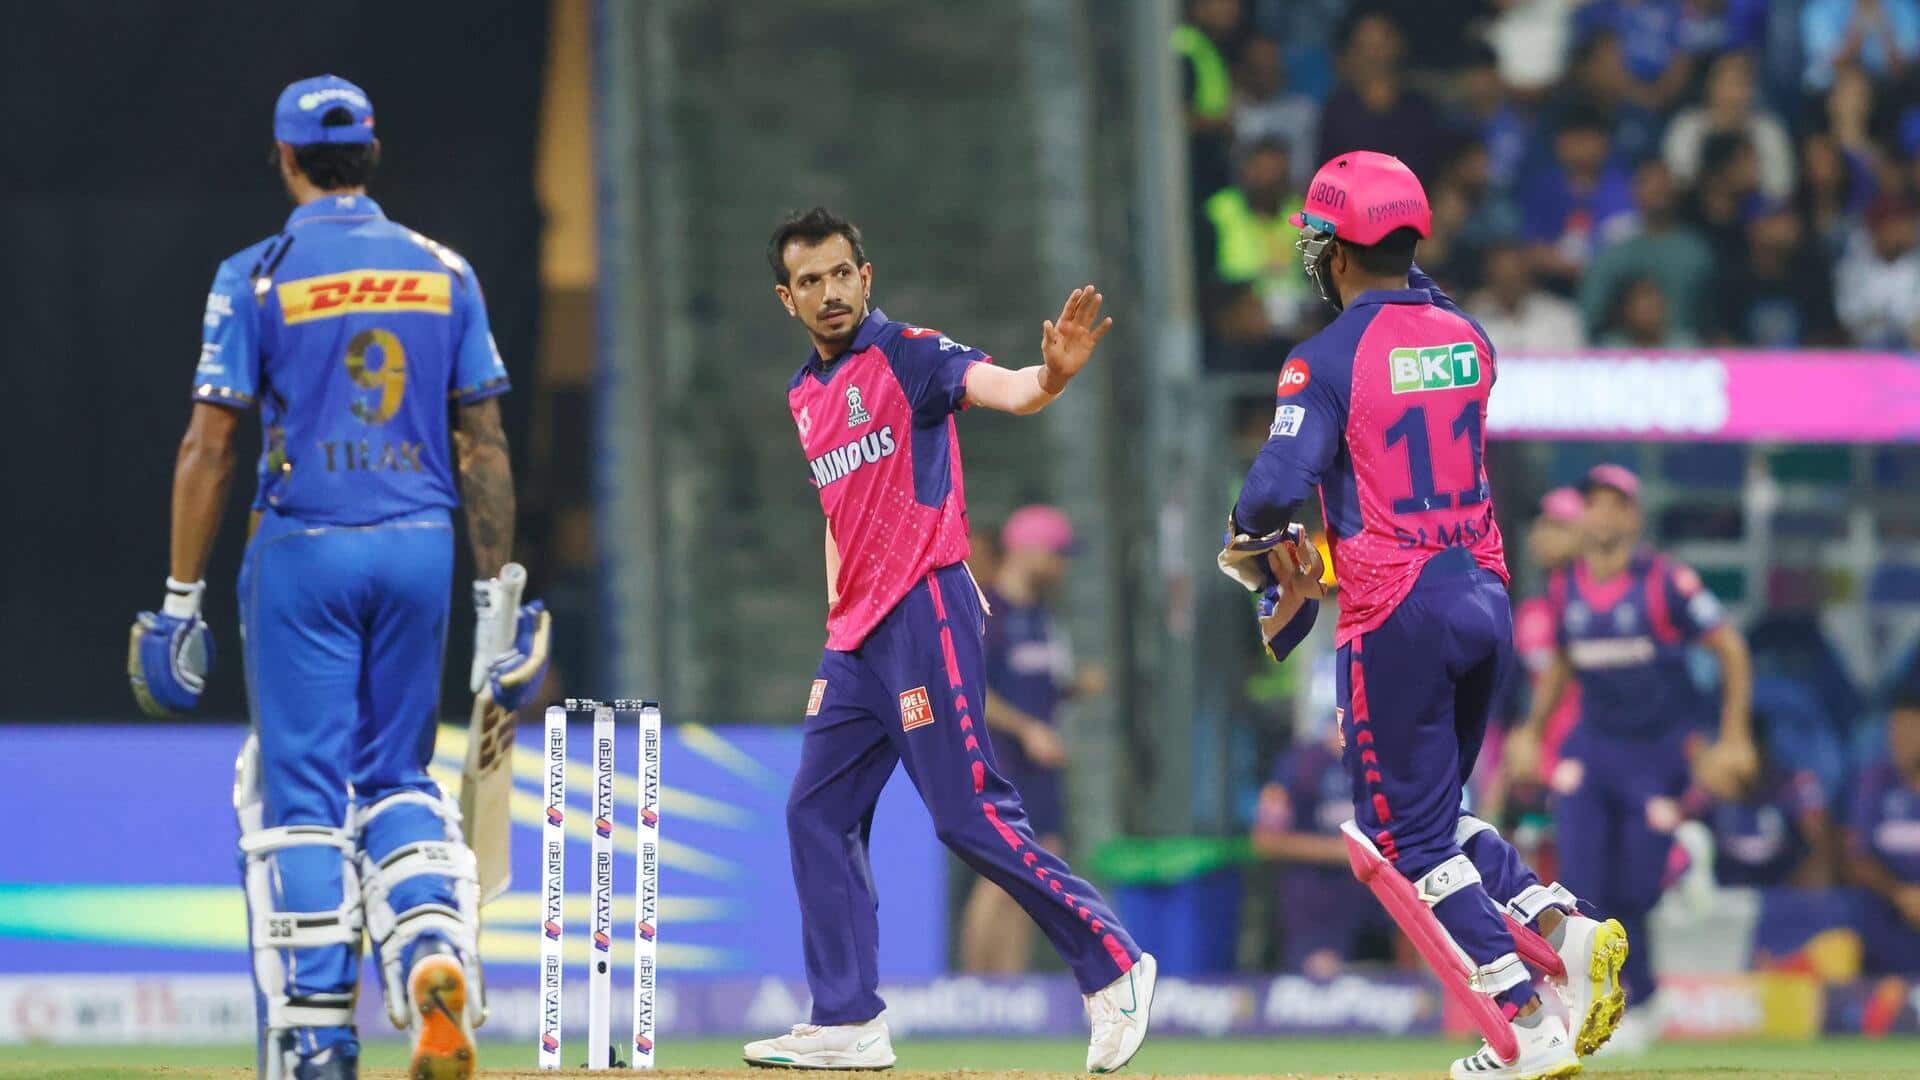 Yuzvendra Chahal becomes first bowler to claim 200 IPL wickets